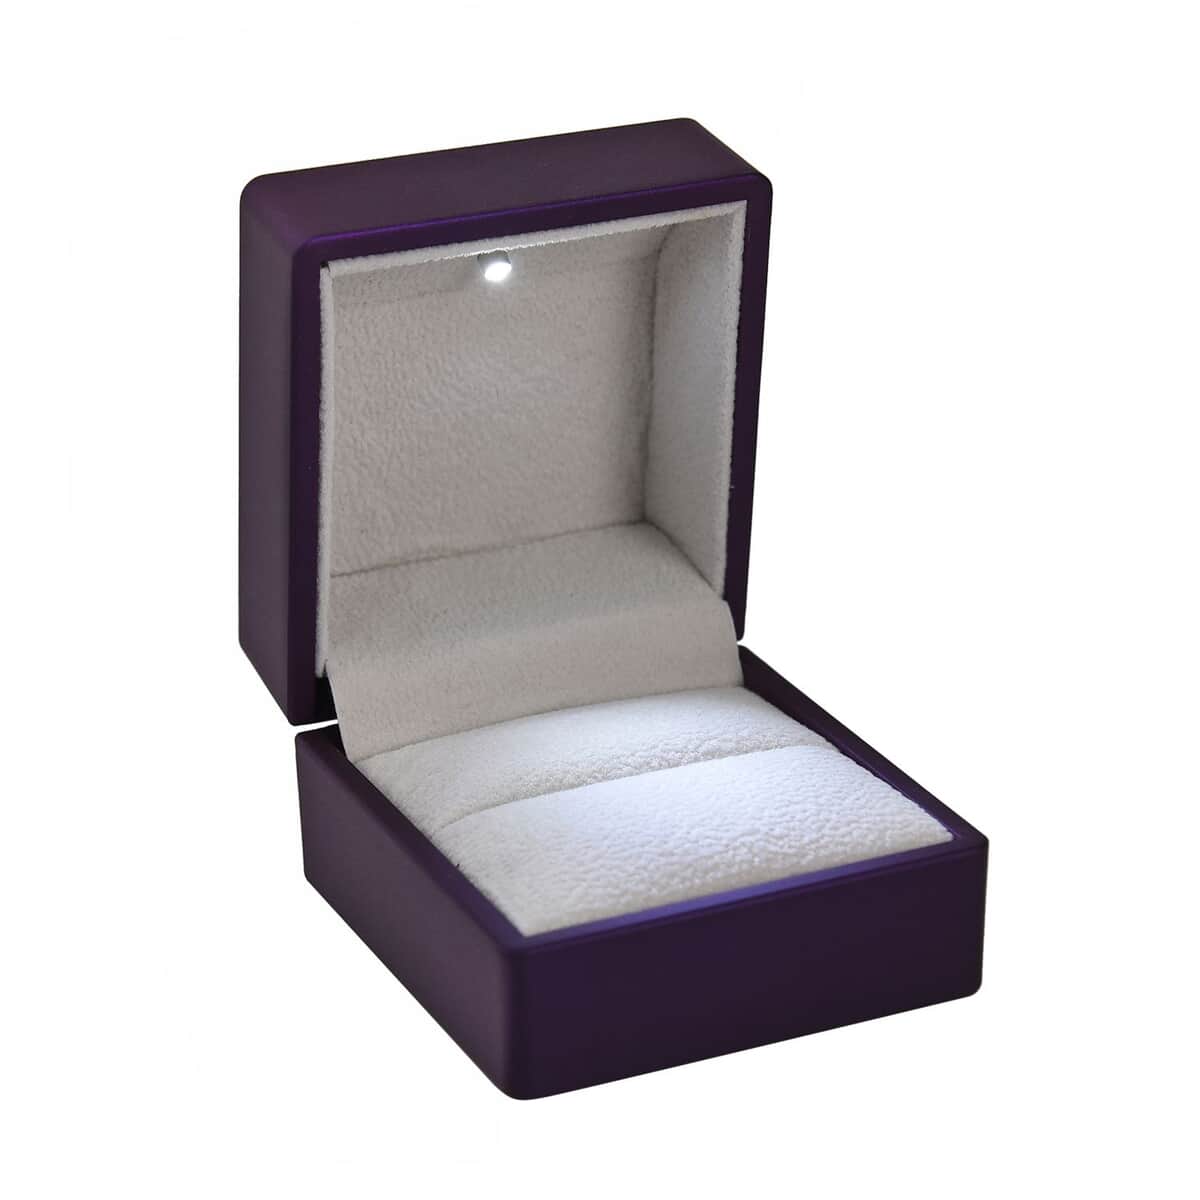 Set of 2 Sky Teal & Purple Solid Polish LED Light Ring Box (Can Hold up to 2 Rings) image number 3